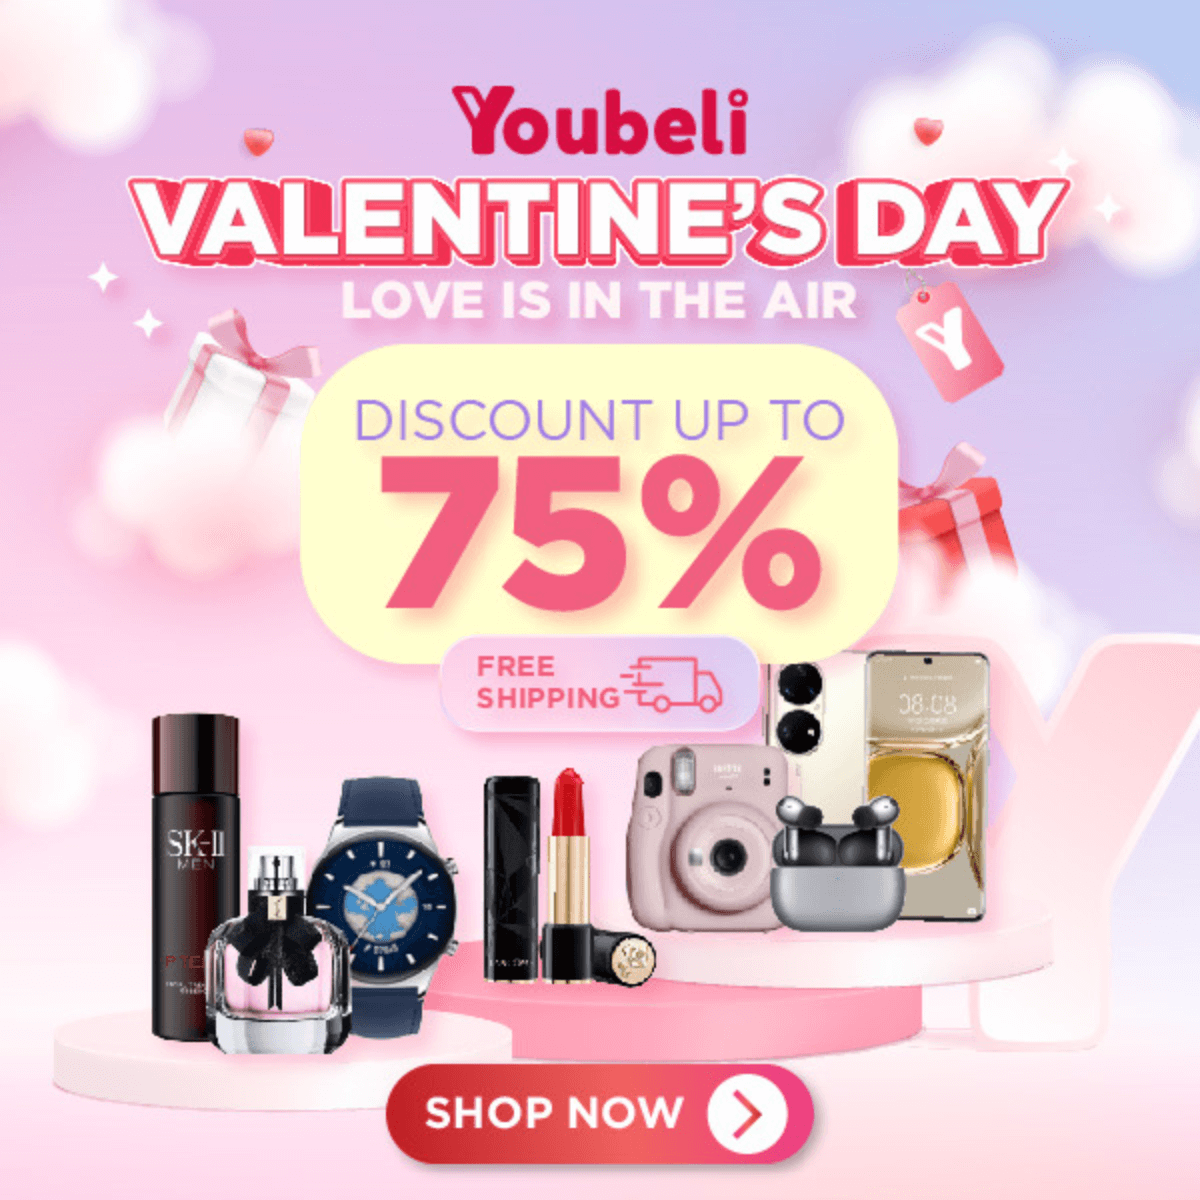 Valentine's Day Sale - Love is in the Air